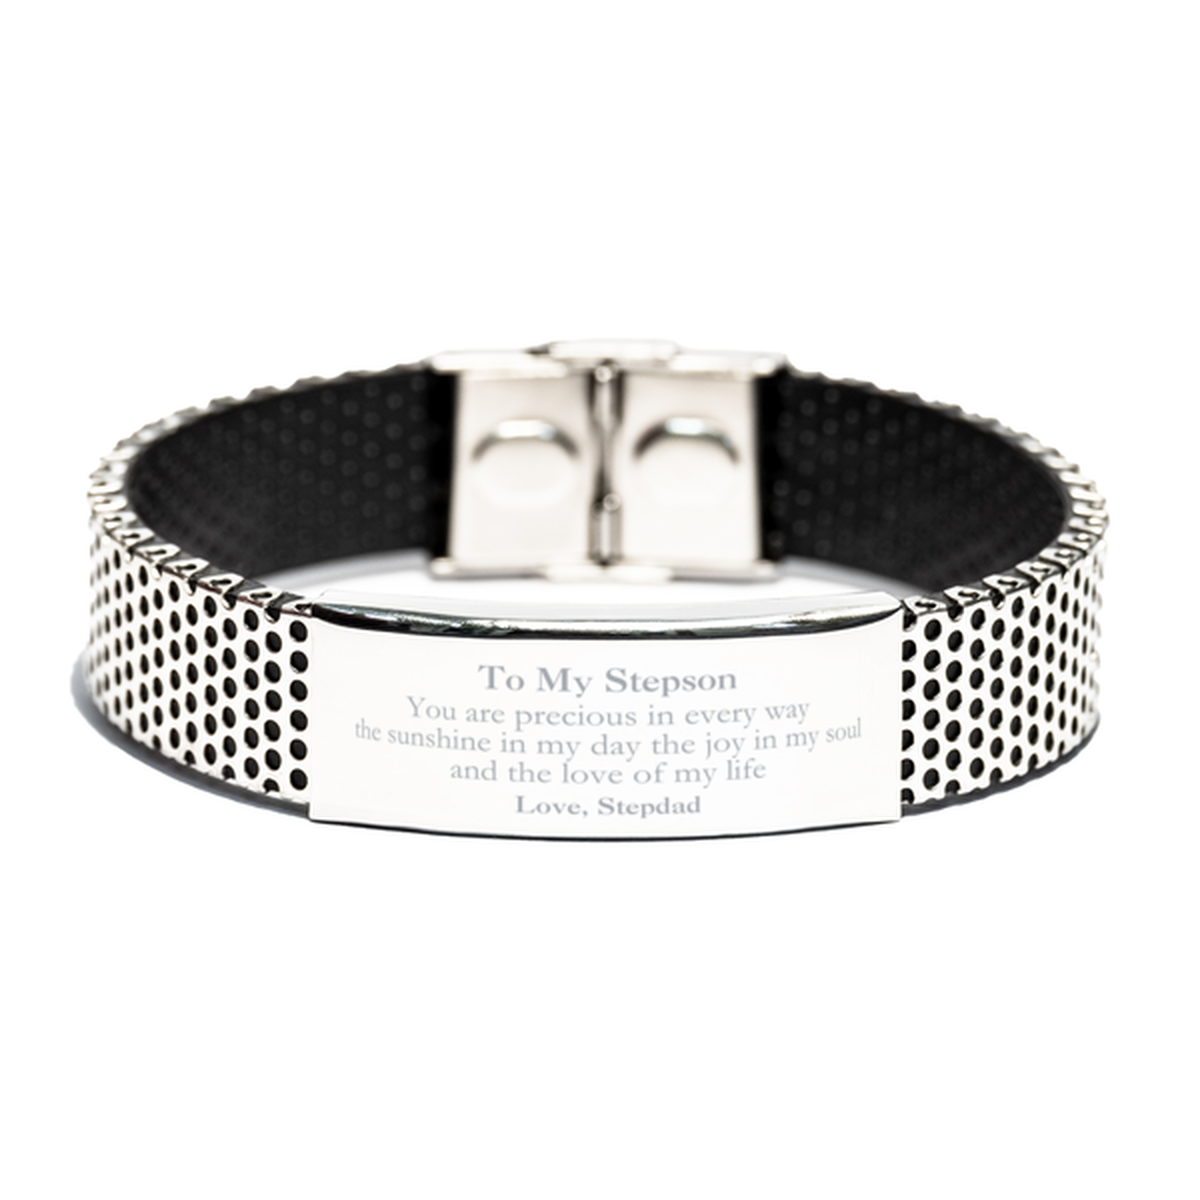 Graduation Gifts for Stepson Stainless Steel Bracelet Present from Stepdad, Christmas Stepson Birthday Gifts Stepson You are precious in every way the sunshine in my day. Love, Stepdad